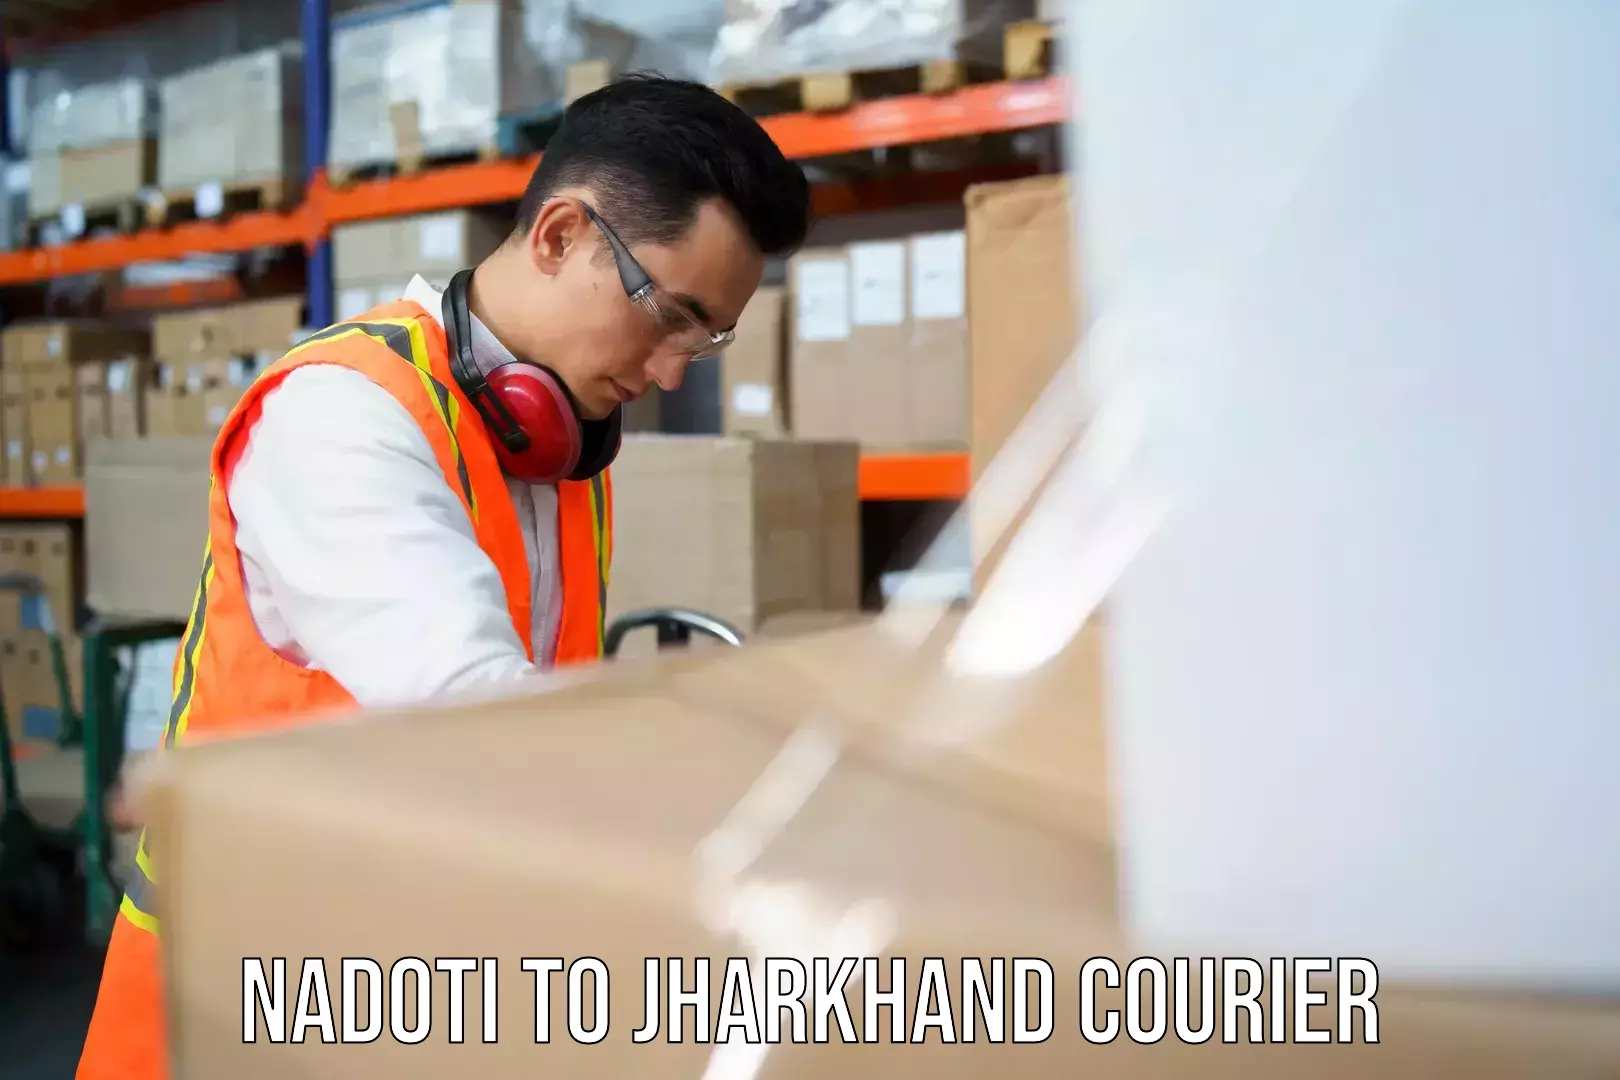 State-of-the-art courier technology Nadoti to Padma Hazaribagh